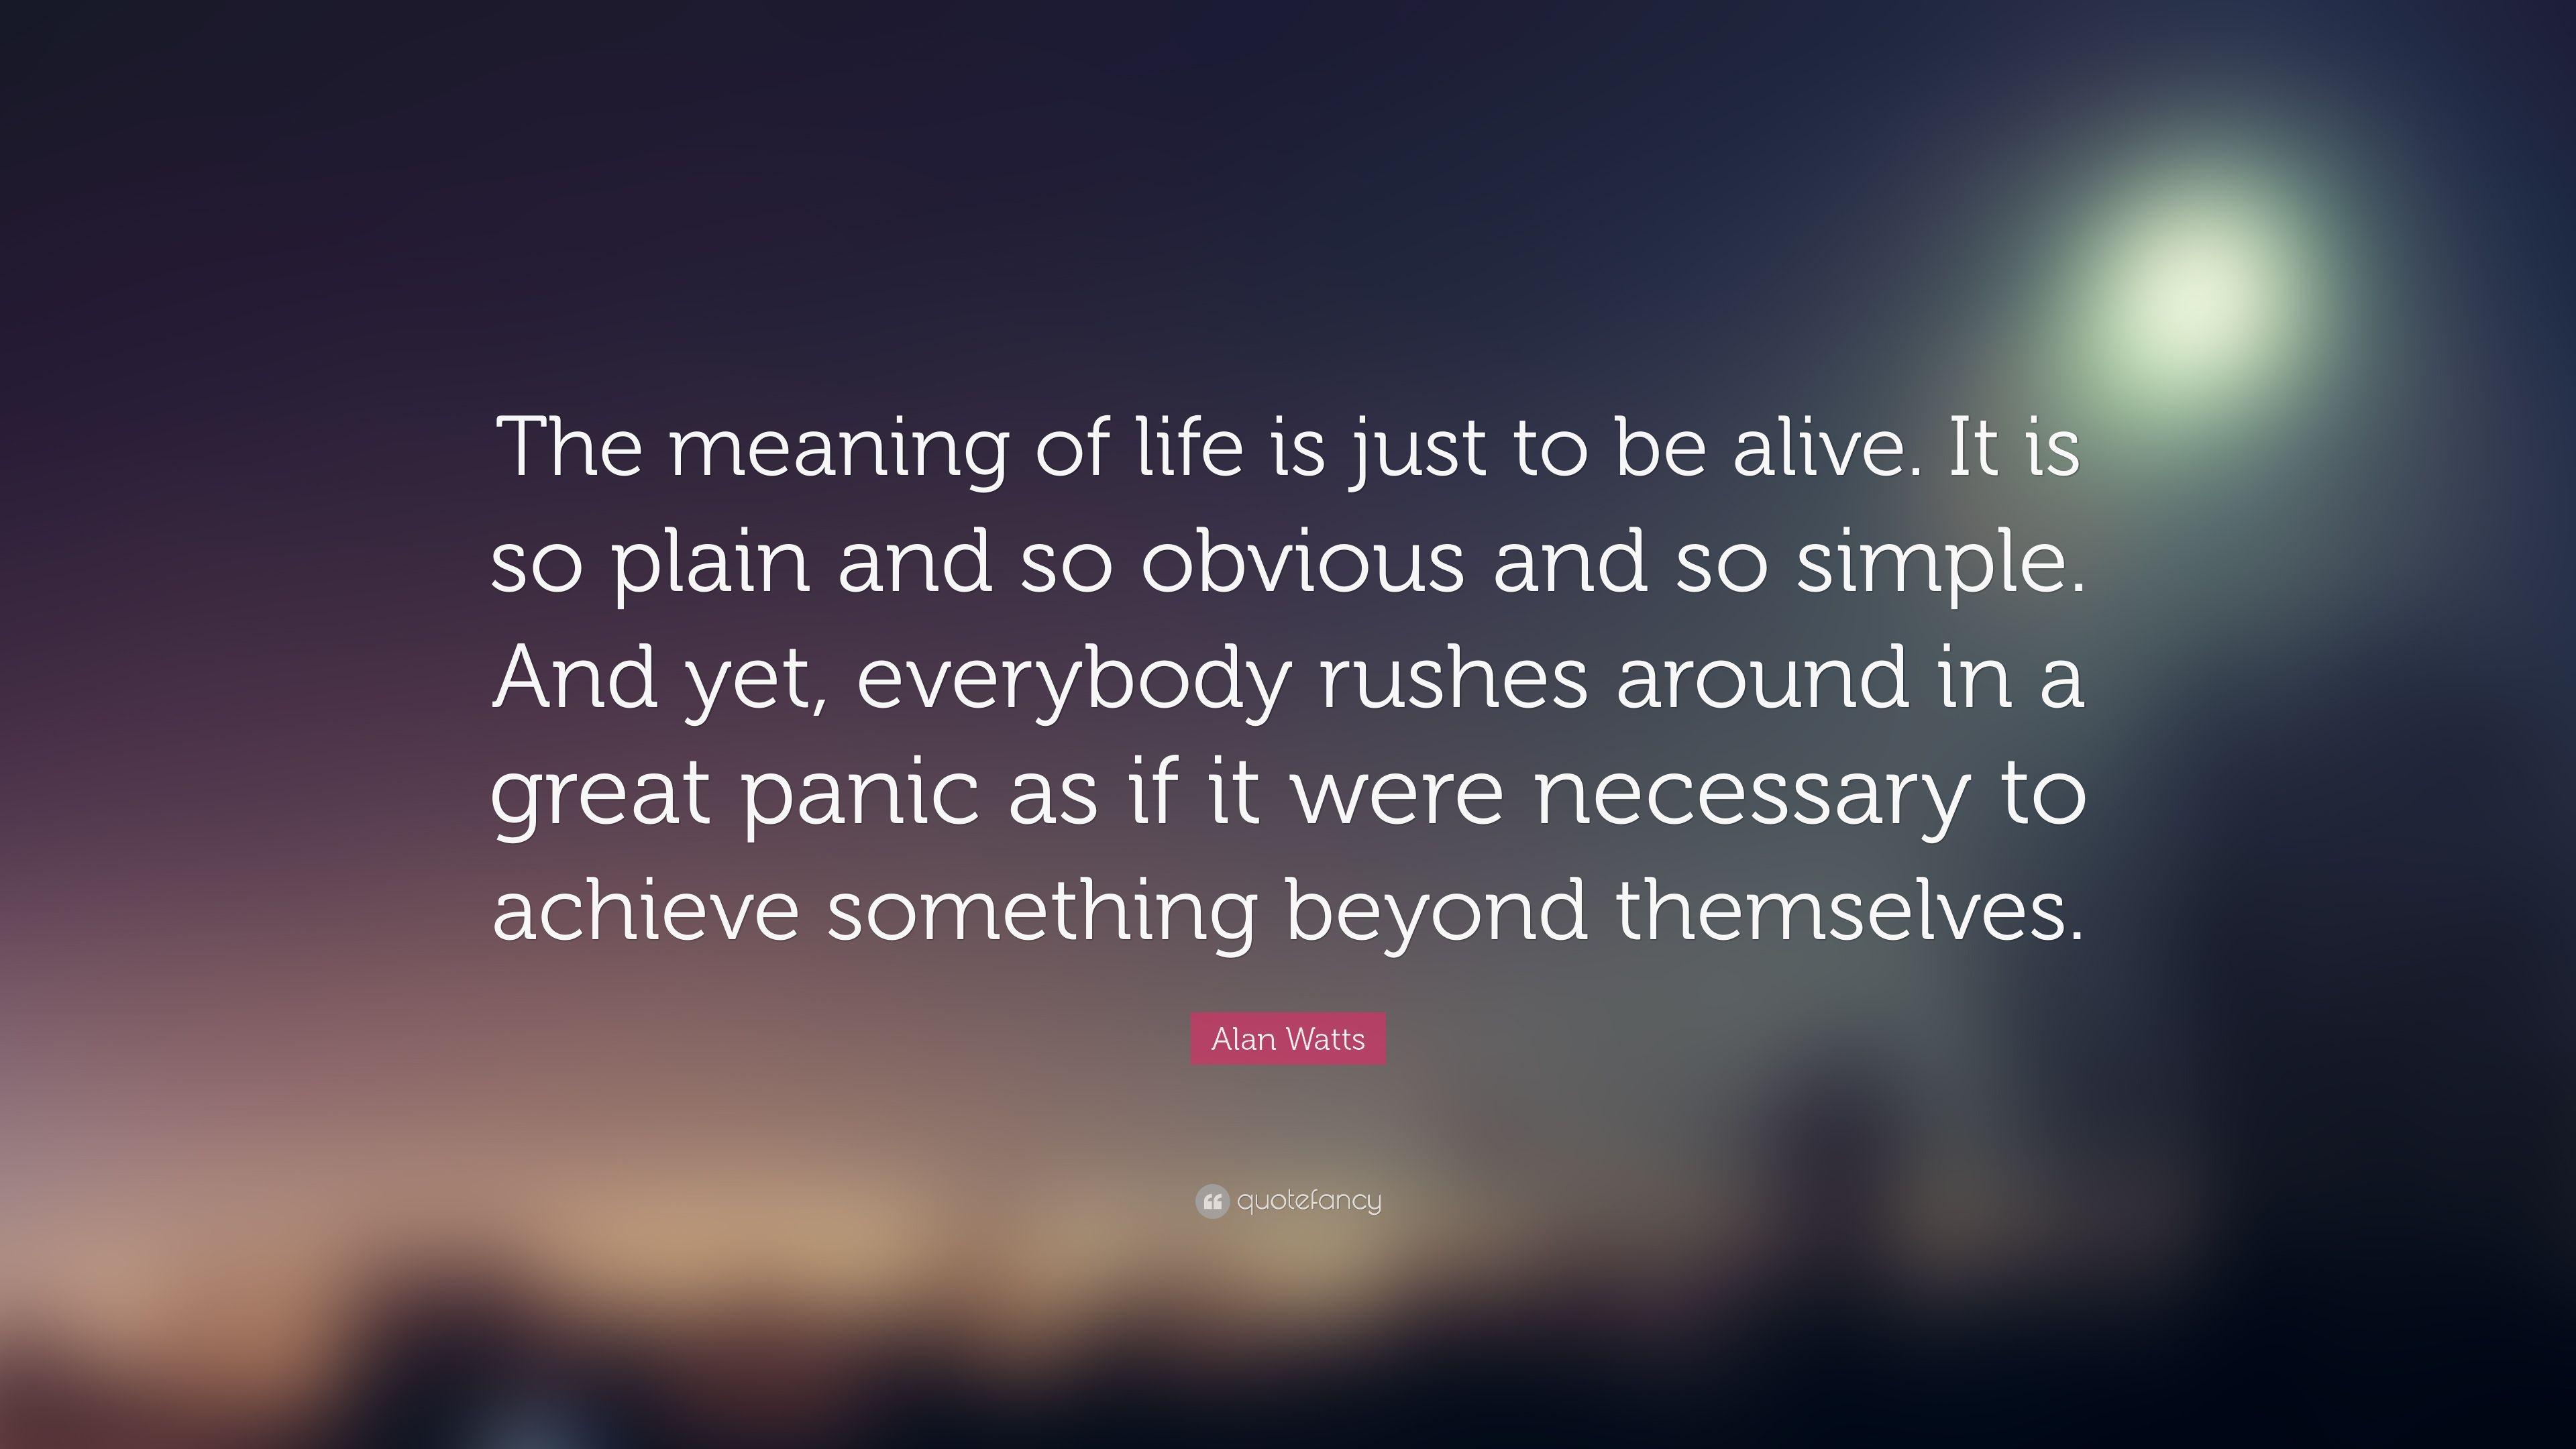 Alan Watts Quote: “The meaning of life is just to be alive. It is